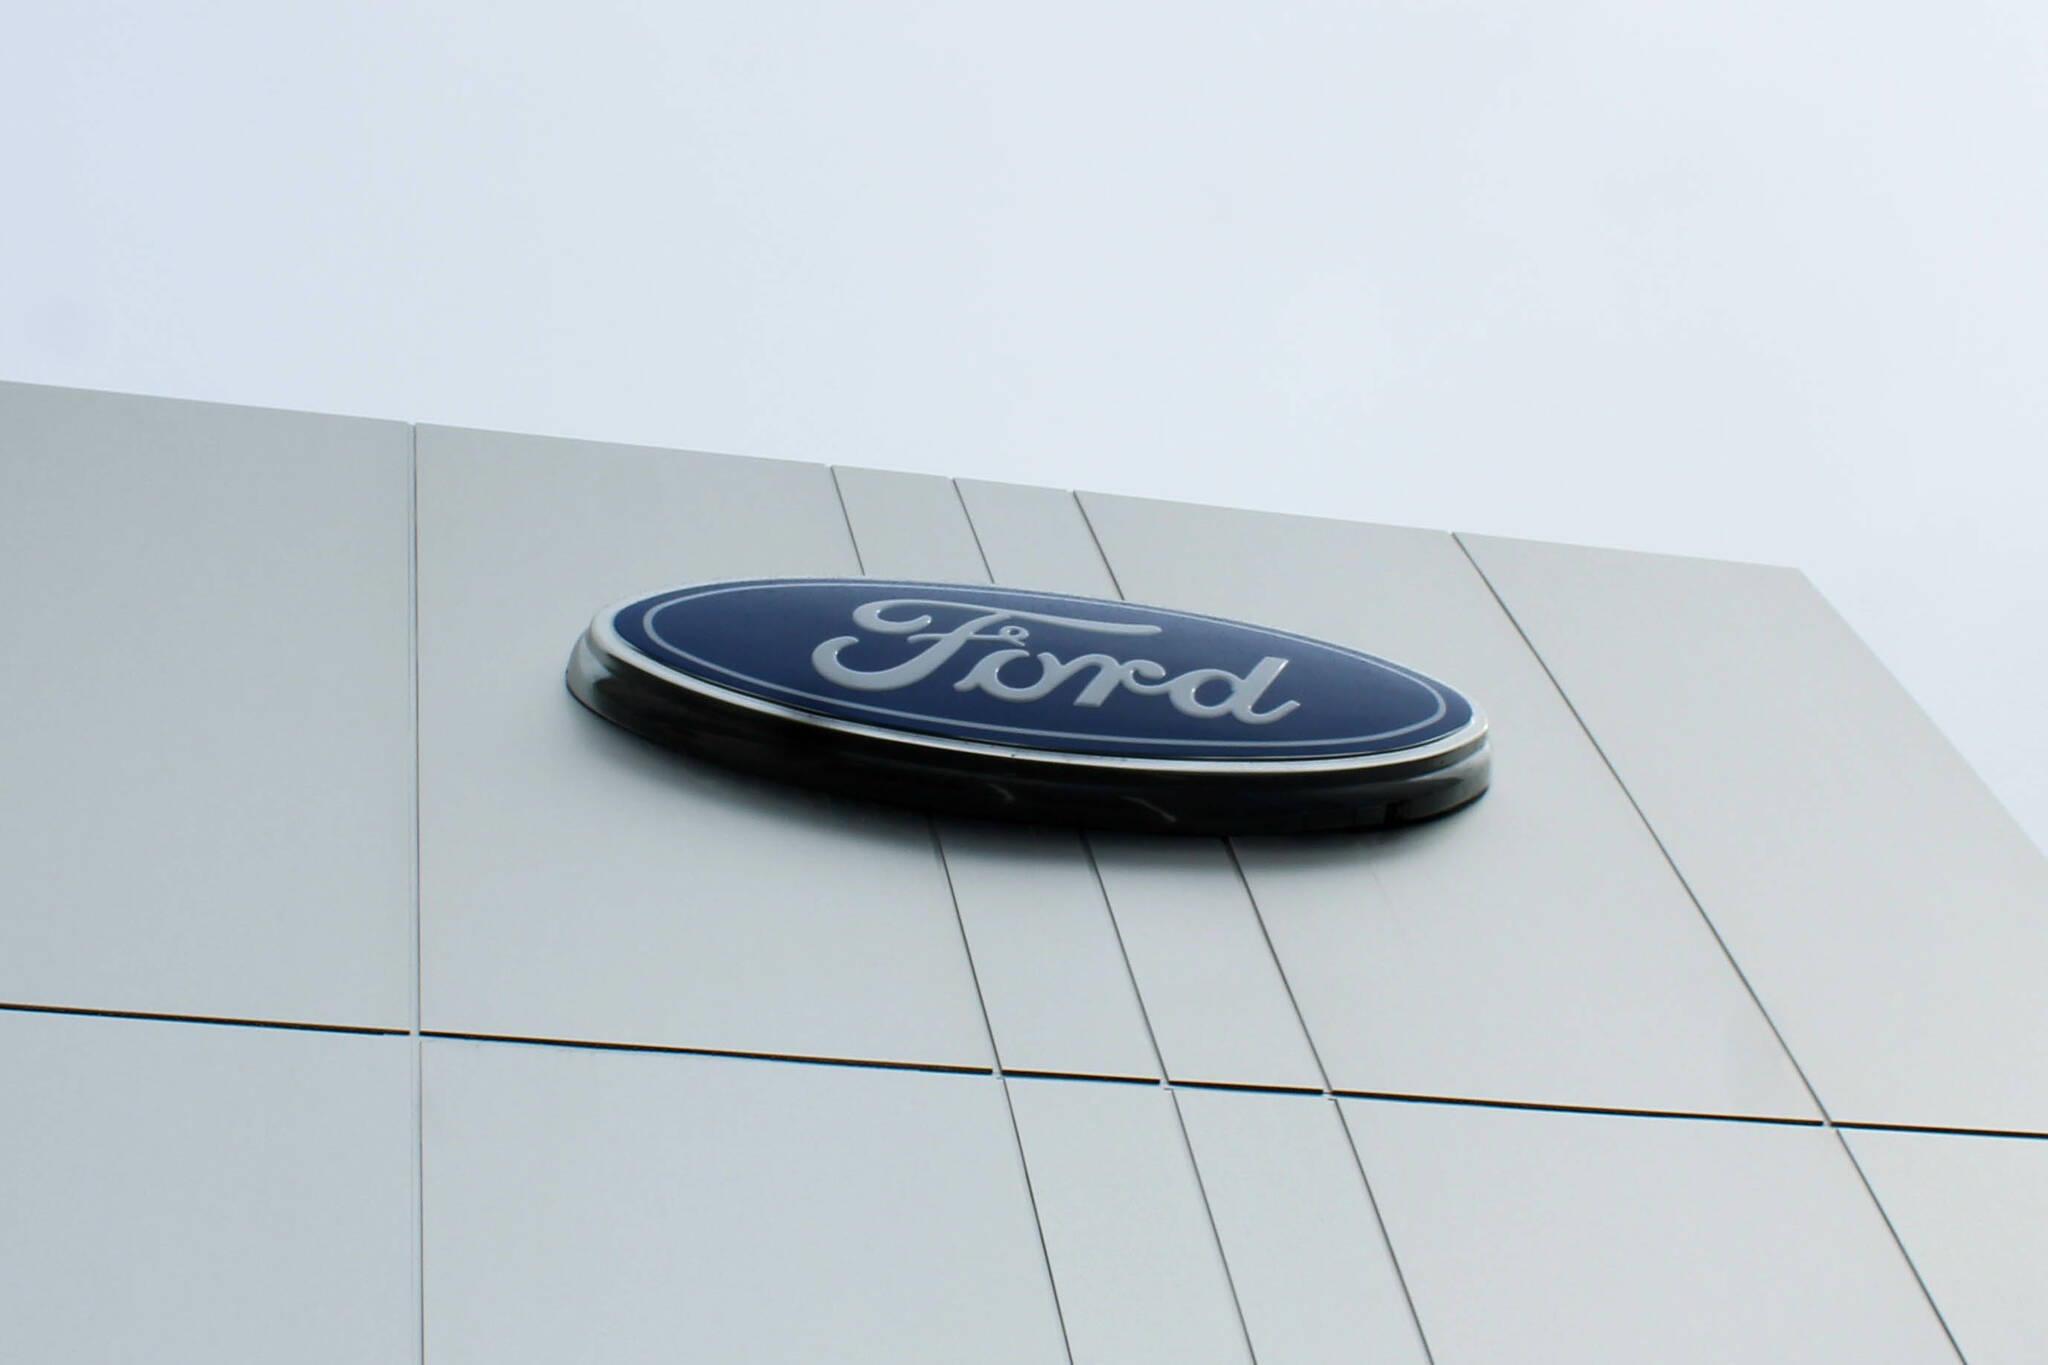 The Ford logo overlooks the Sterling Highway from Kendall’s new service facility and dealership on Wednesday, Aug. 17, 2023, in Soldotna, Alaska. (Ashlyn O’Hara/Peninsula Clarion)